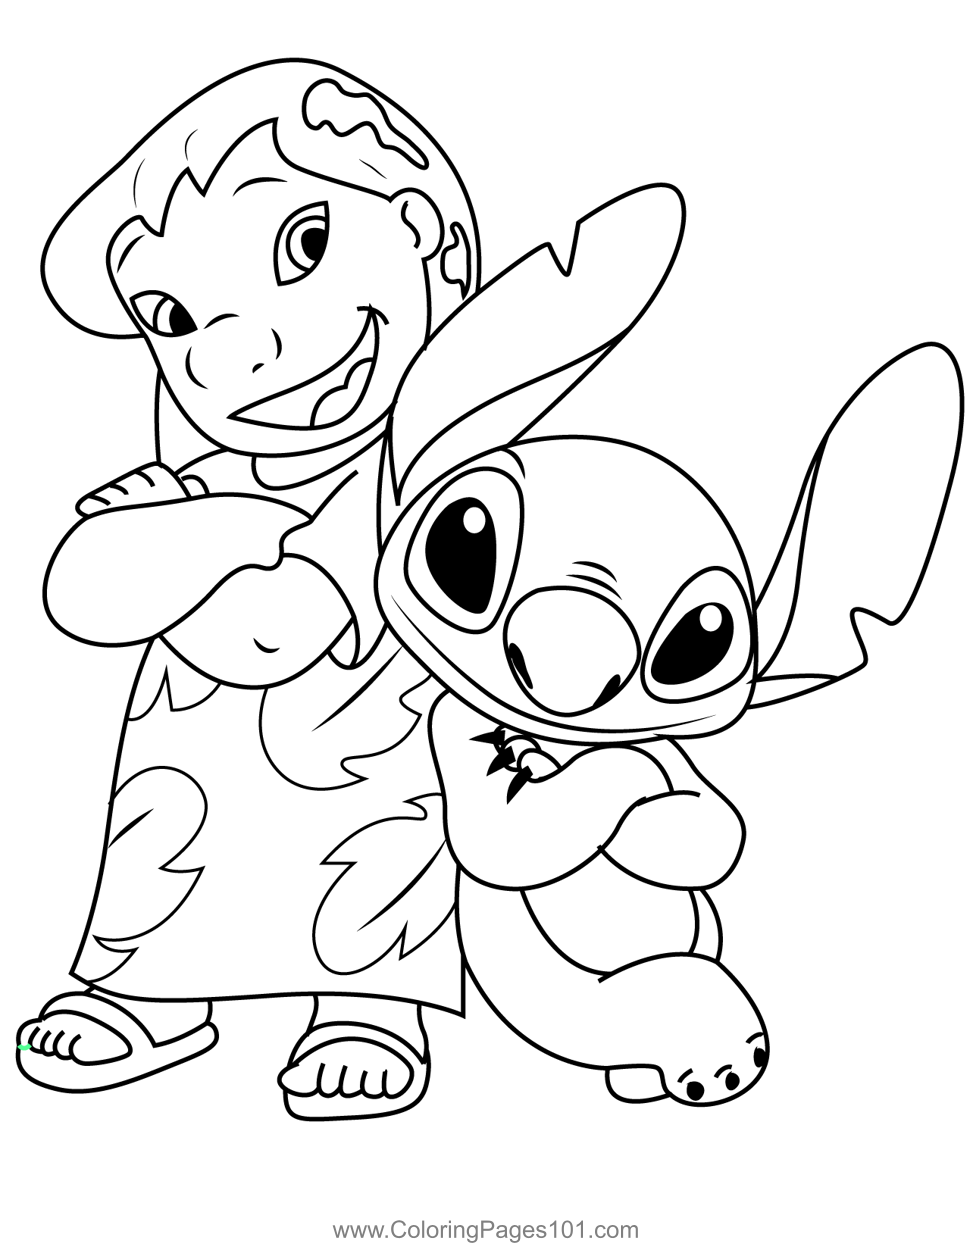 Stand Lilo And Stitch Coloring Page for Kids - Free Lilo & Stitch Printable Coloring  Pages Online for Kids  | Coloring Pages for Kids